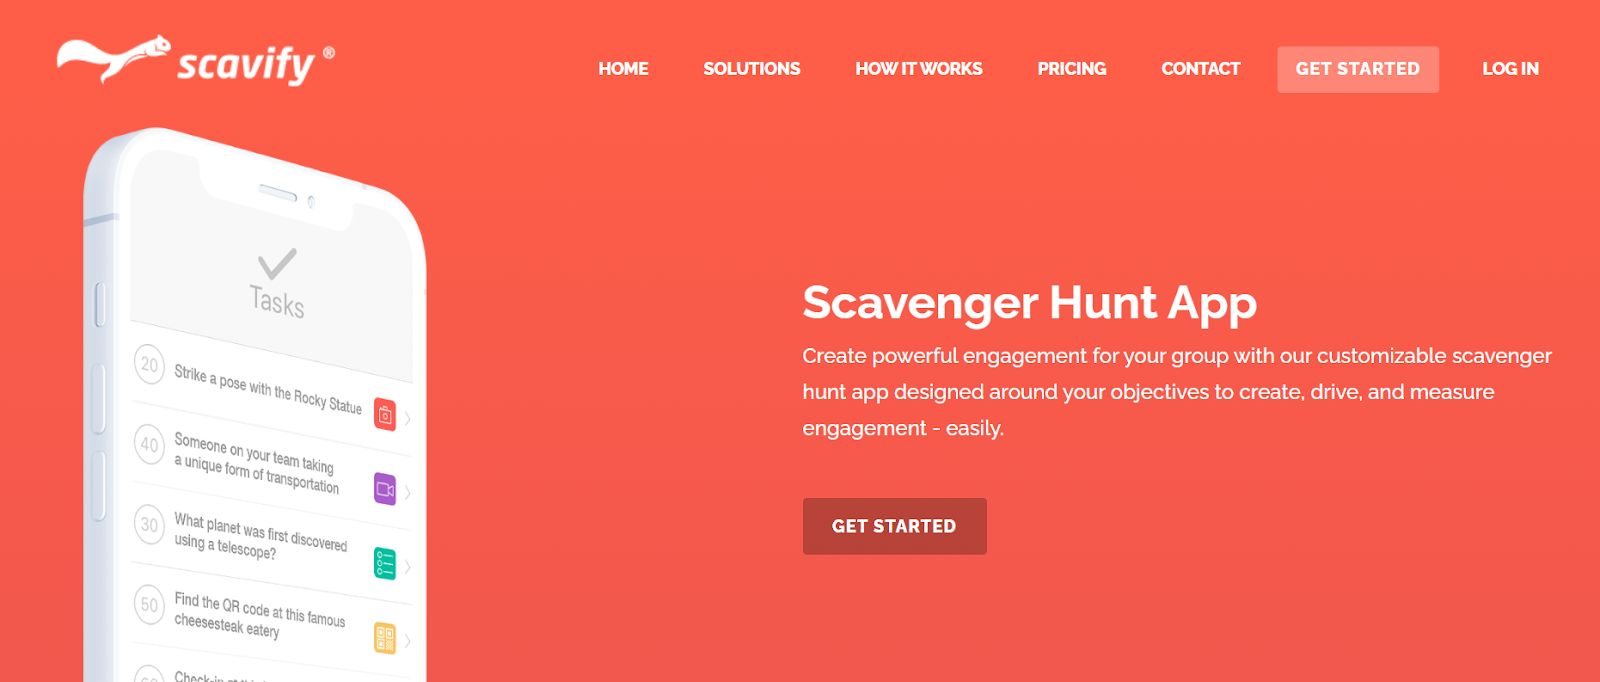 host a virtual scavenger hunt for a corporate team-building activity